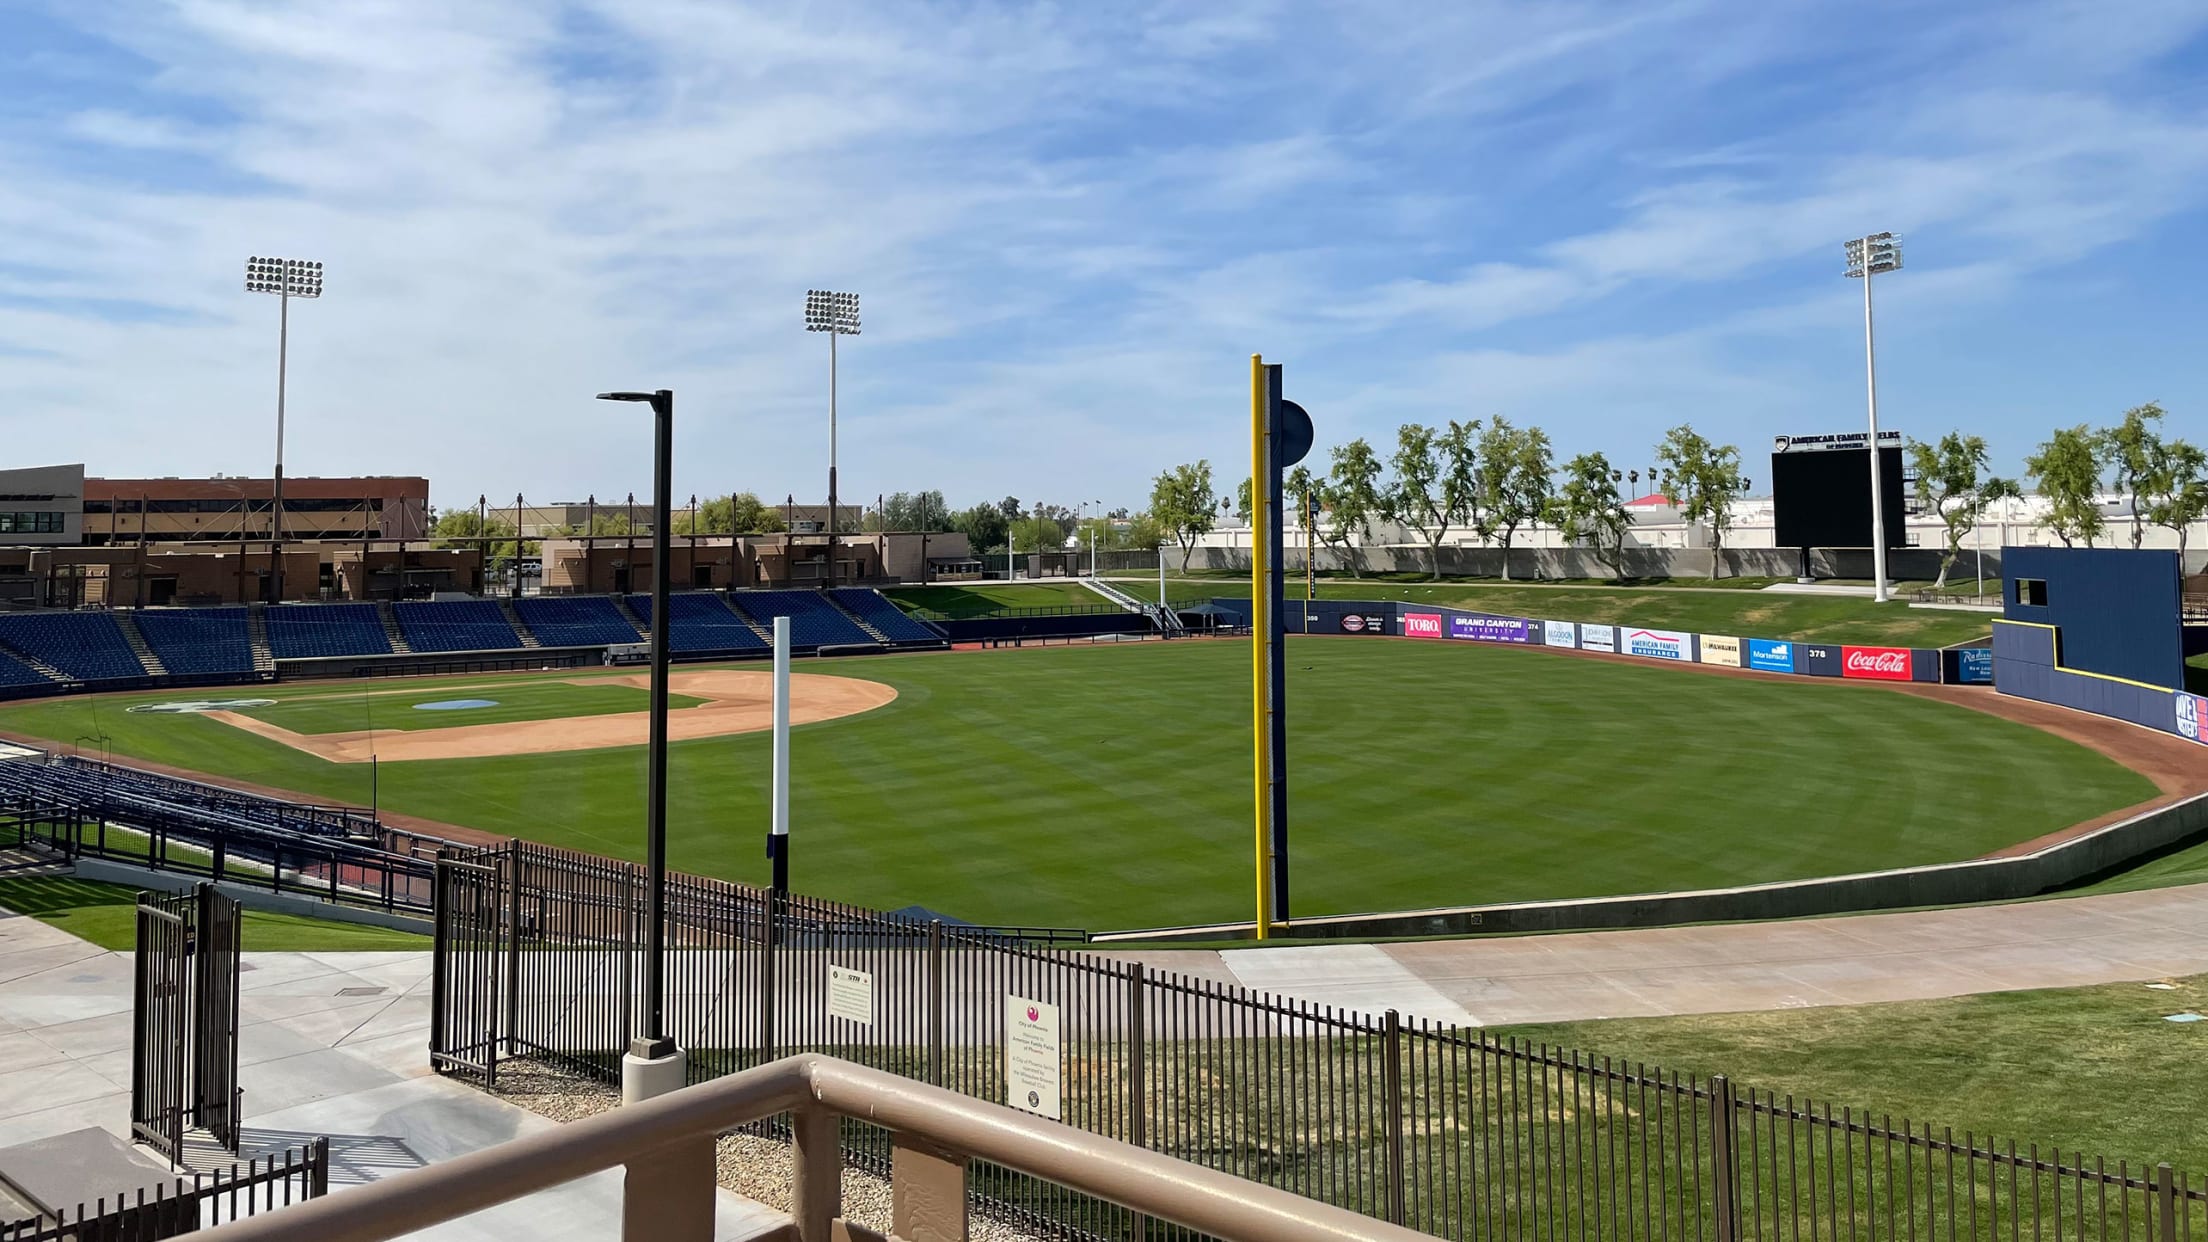 Brewers begin spring training games March 18